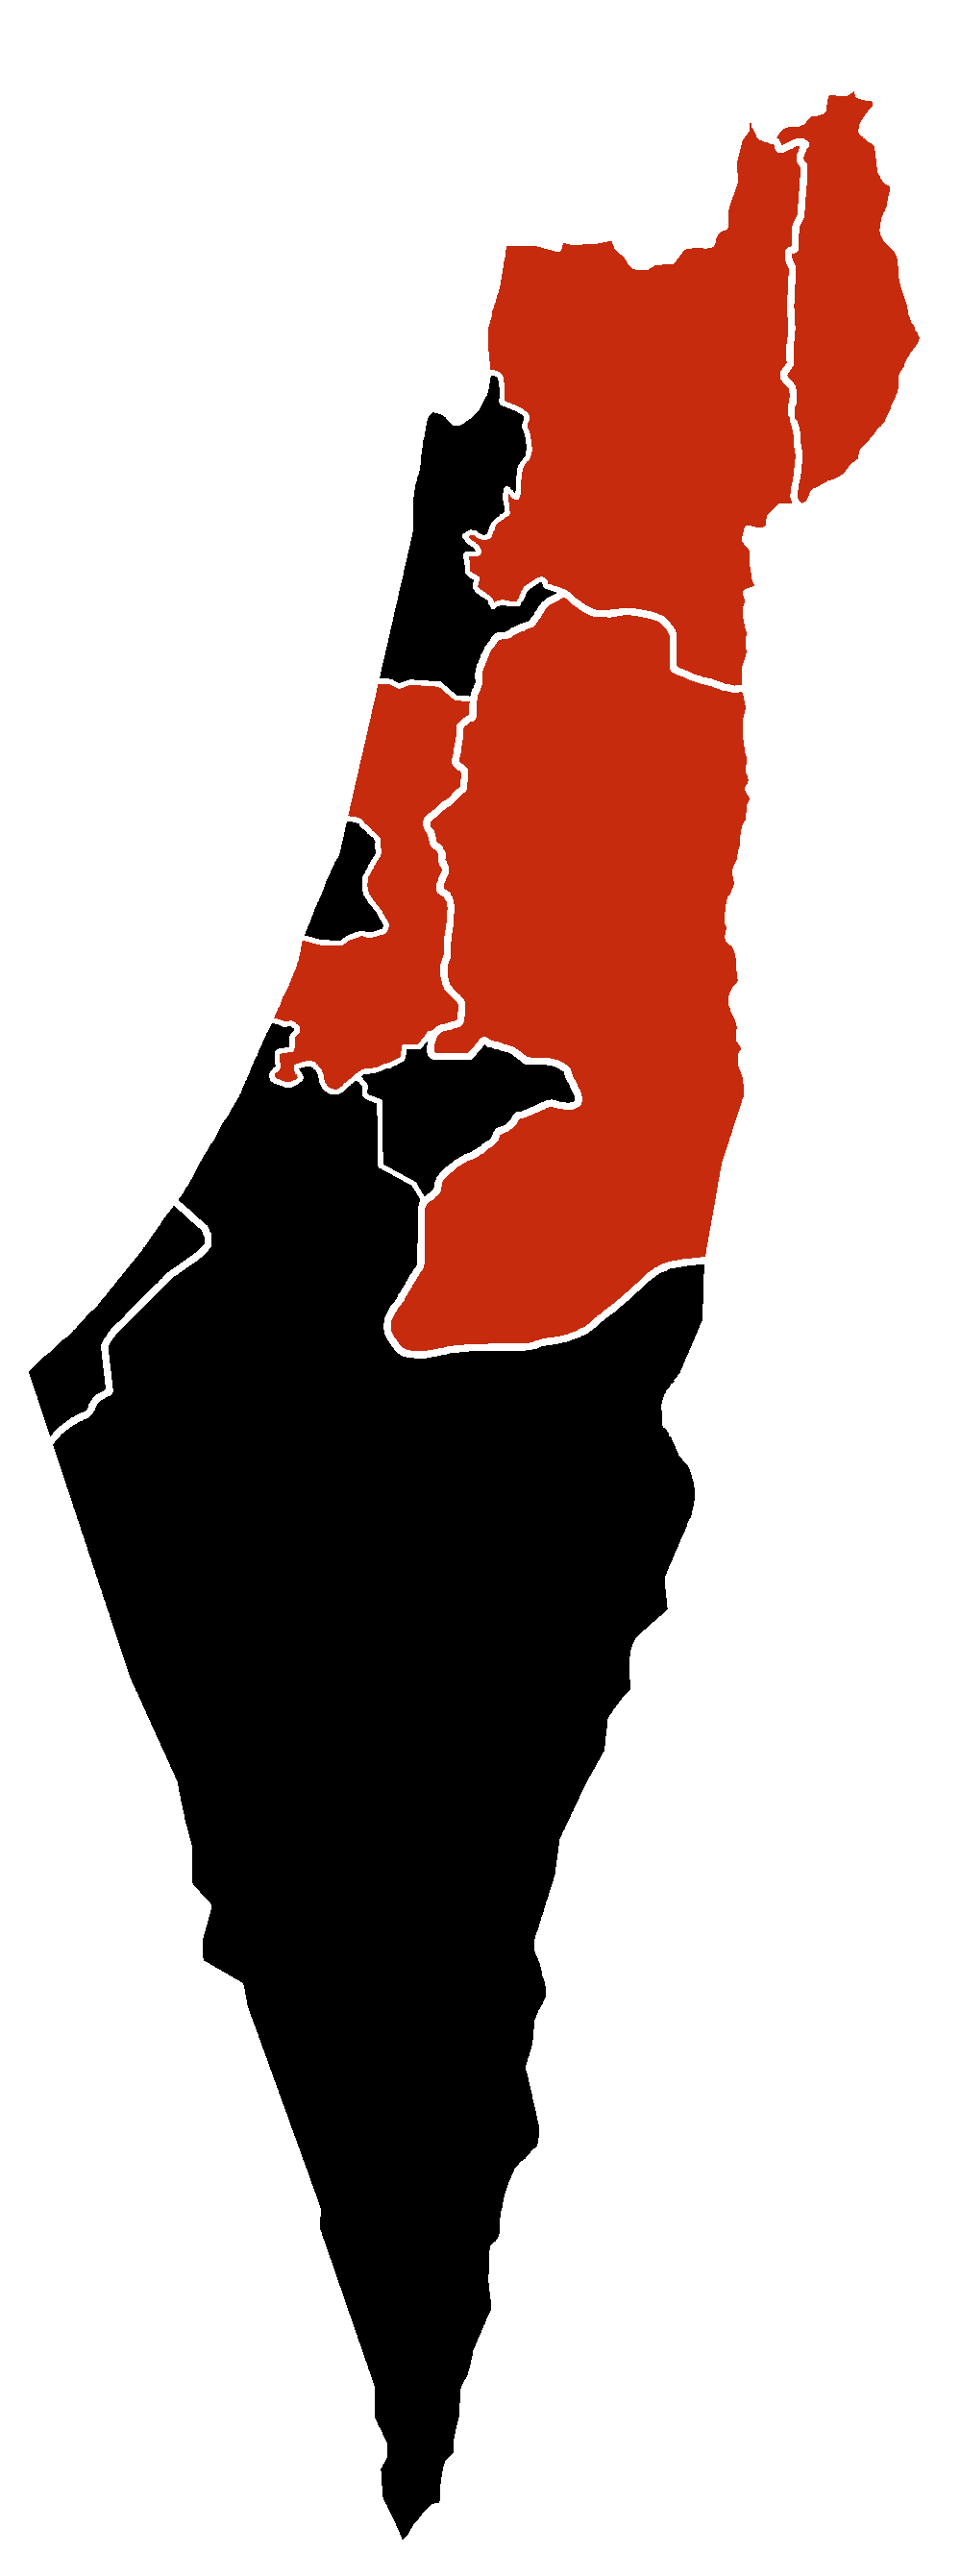 File:Israel map.png